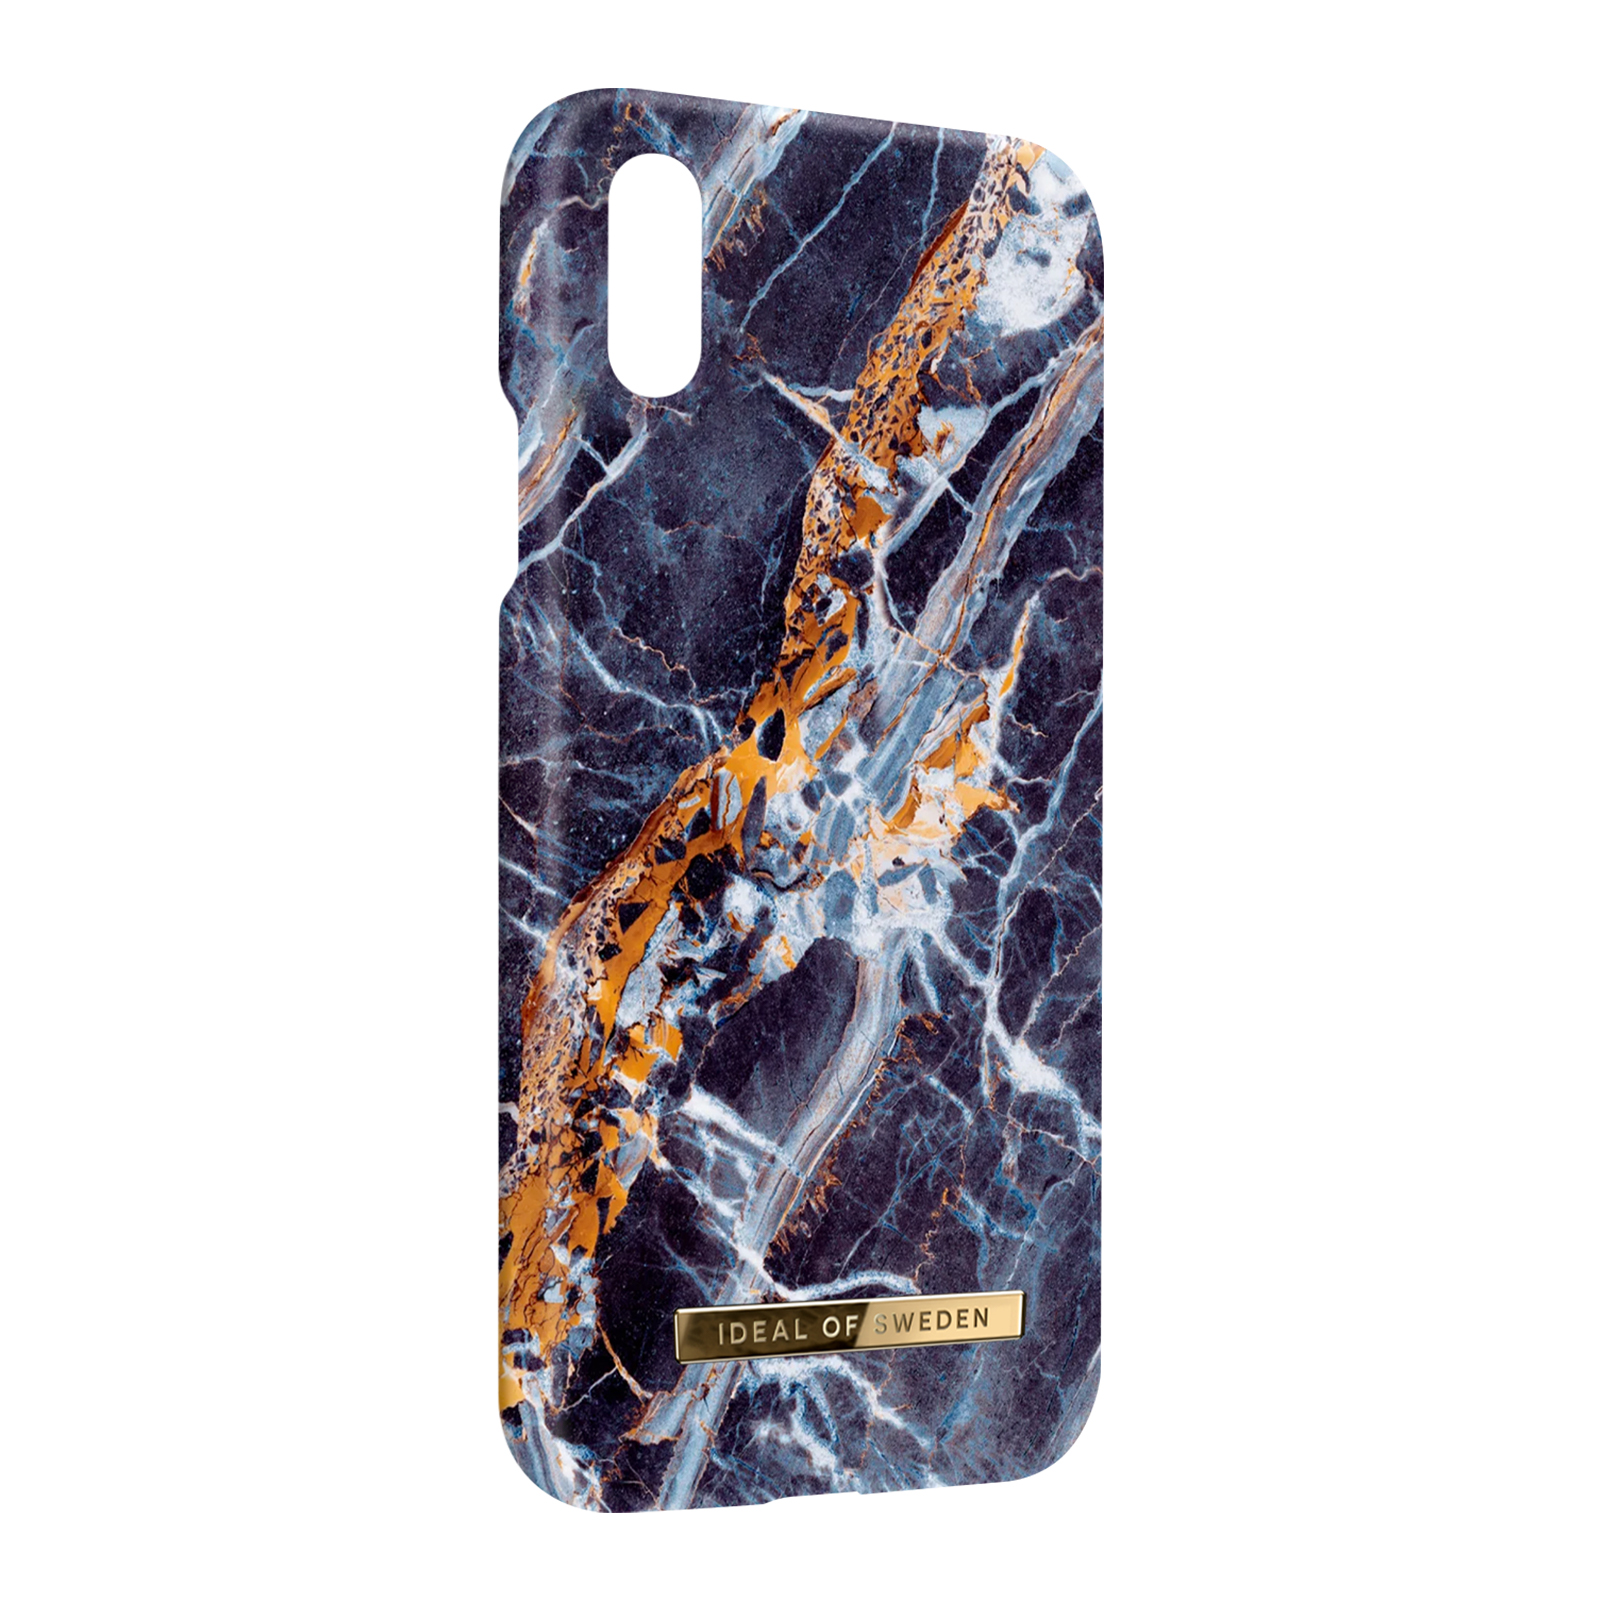 IDEAL OF SWEDEN Midnight Blue XS, Apple, Hülle iPhone Series, Blau Marble Backcover